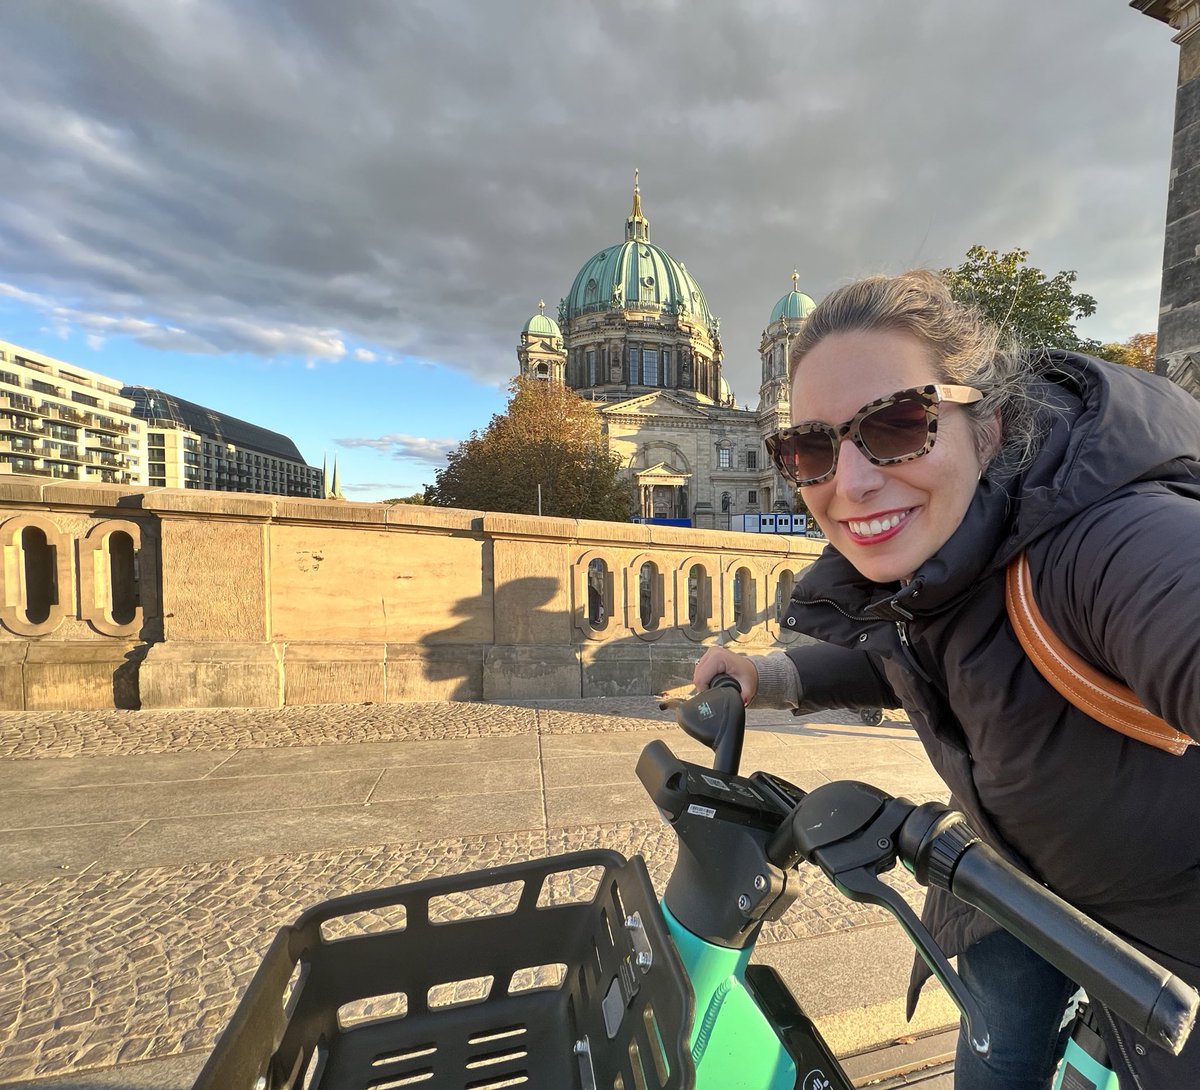 🍃Happy World Car Free Day! 🌏 Next time you need to get somewhere (like me home from work today) #takeatier and turn the commute into a highlight of your day 🤩 @tier_mobility #WorldCarFreeDay